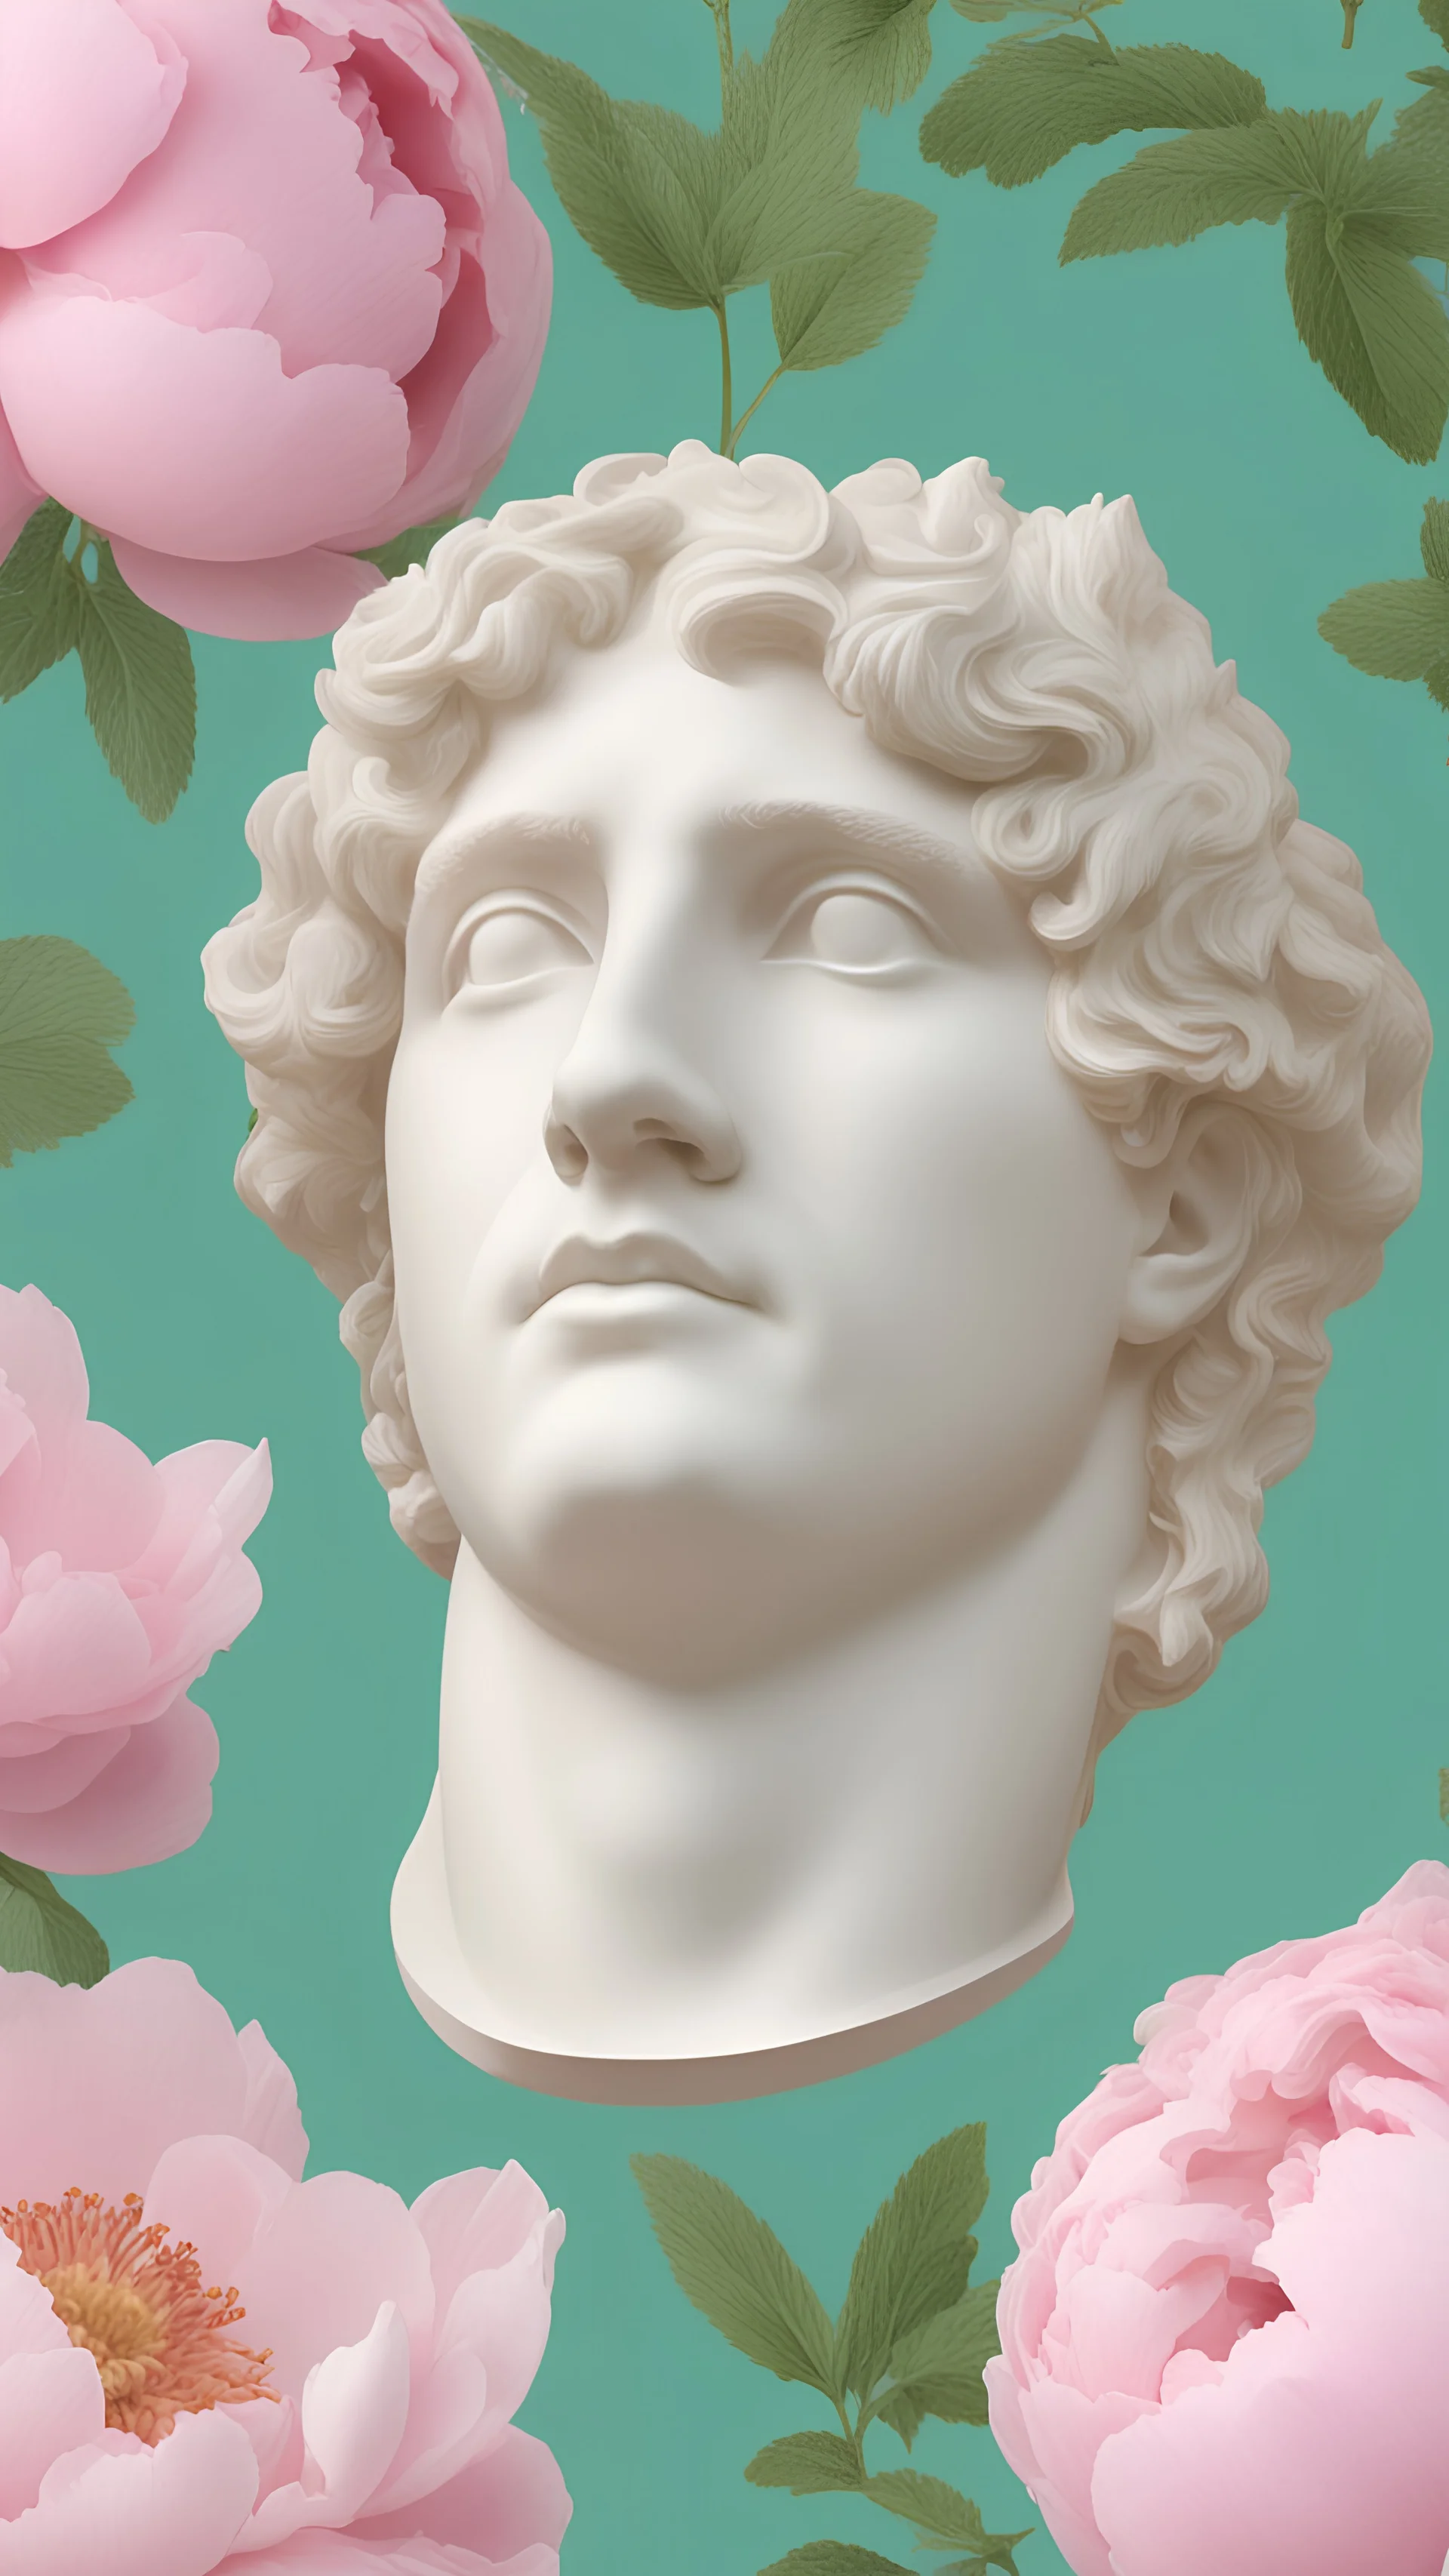 Plaster head of David, pink peonies on the head, Doric order, mint background --ar 4:5